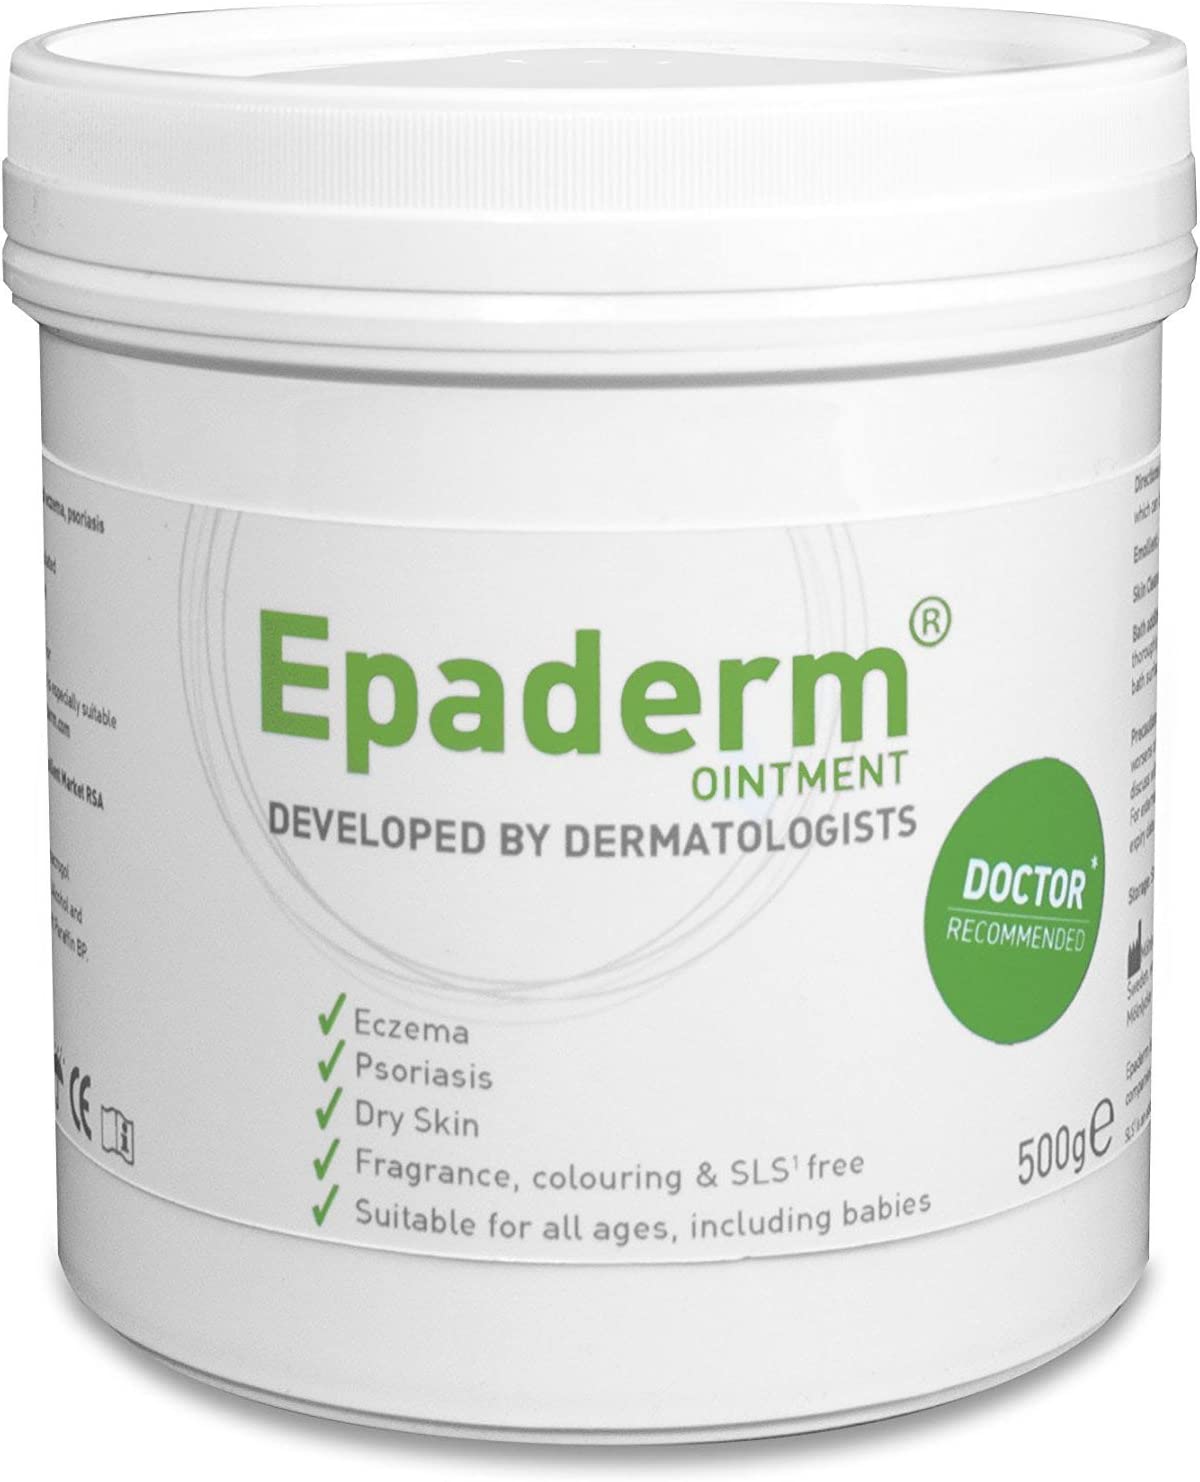 Image of Epaderm Emollient For Dry Skin - 500g